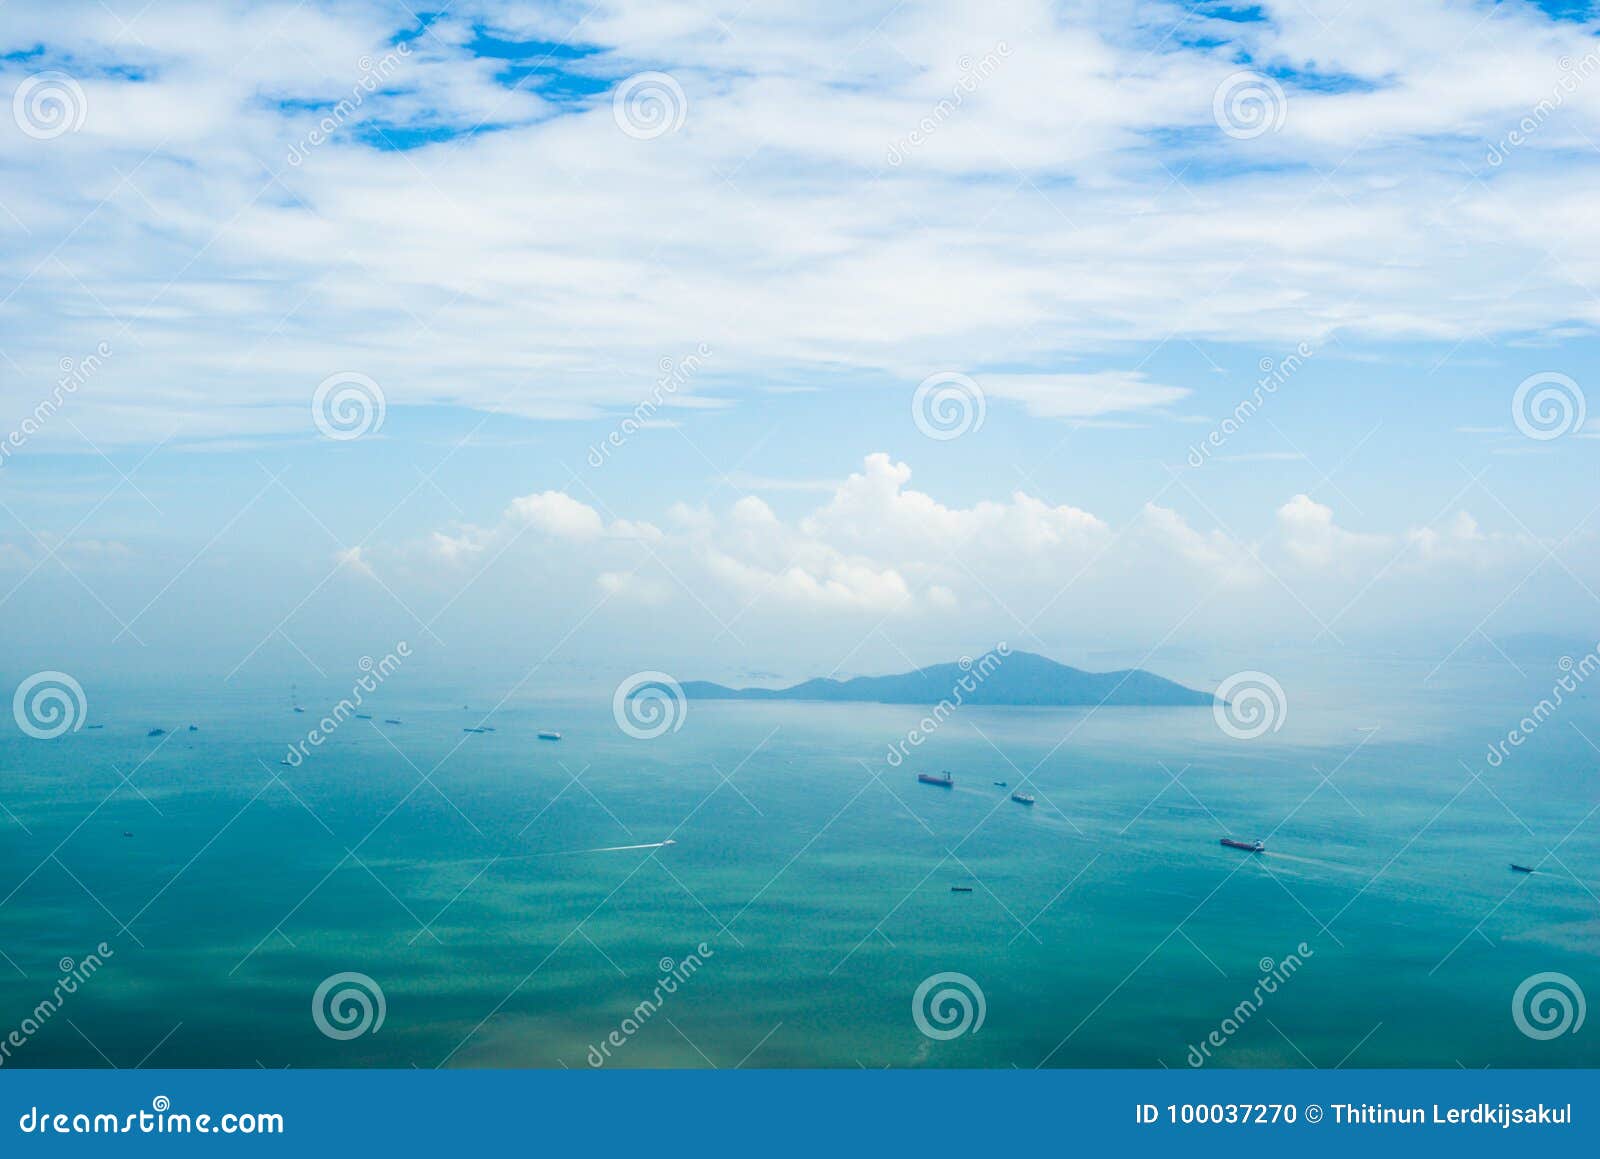 Aerial the island stock photo. Image of background, reef - 100037270